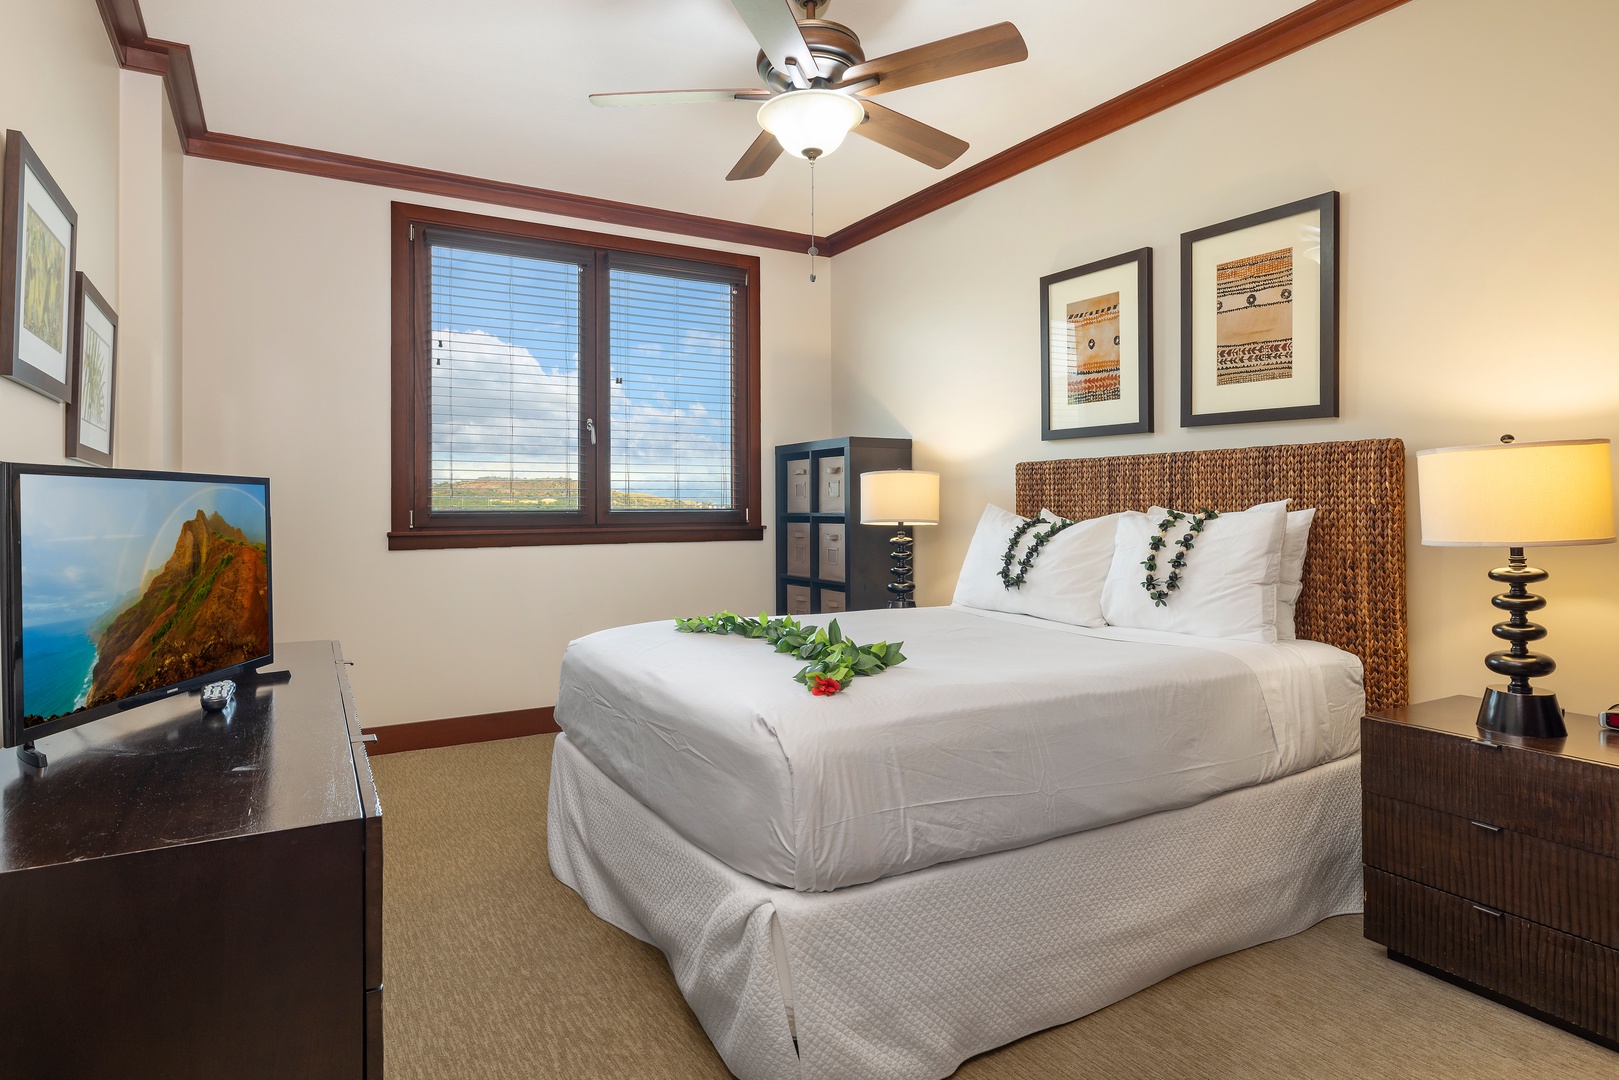 Kapolei Vacation Rentals, Ko Olina Beach Villas O1402 - Enjoy the great view from the second guest bedroom.